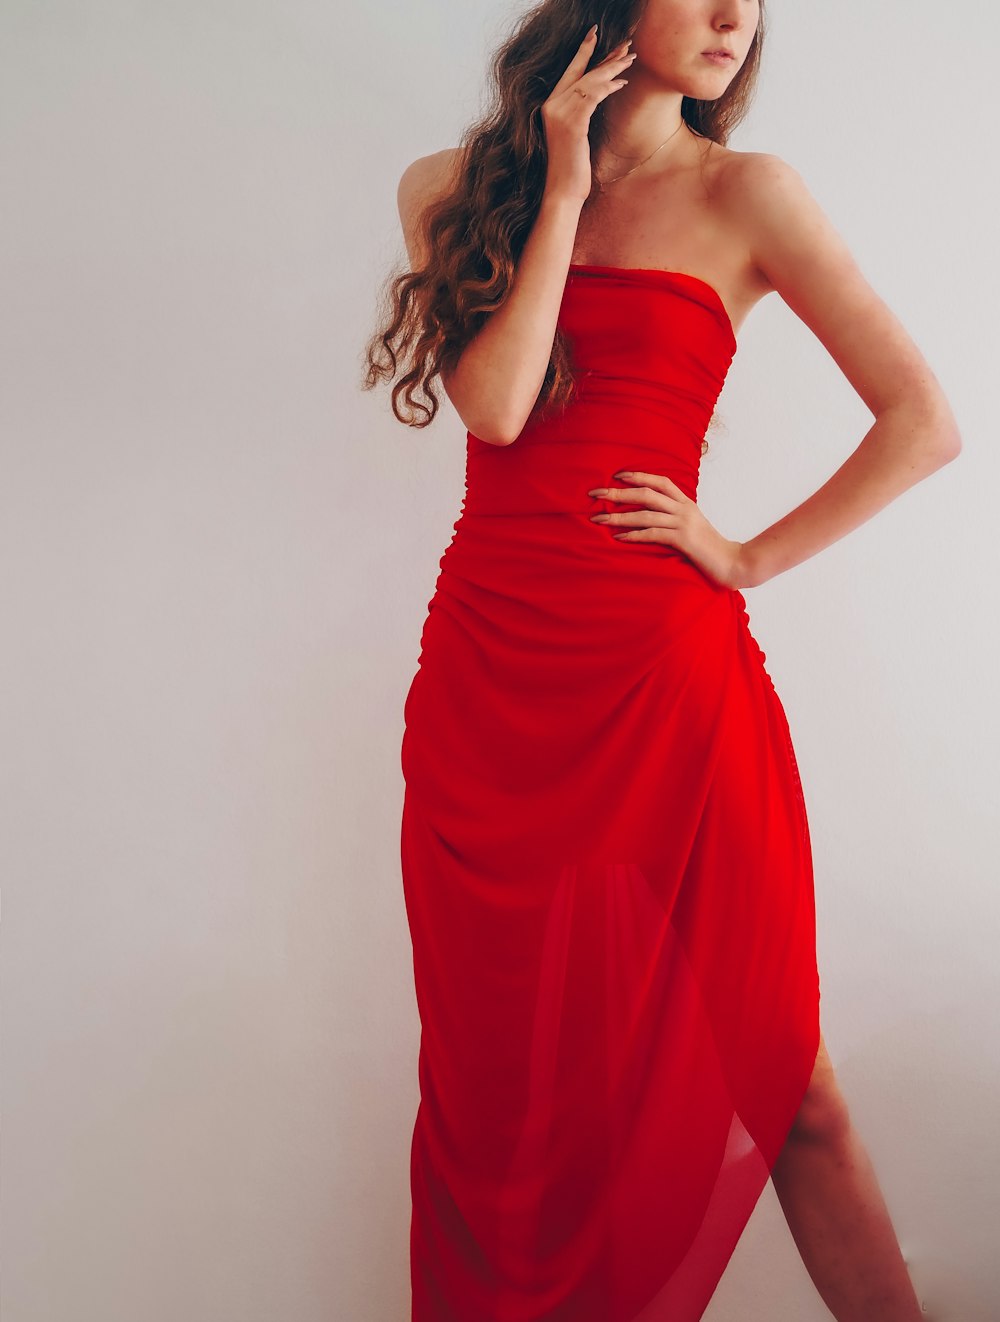 woman in red tube dress